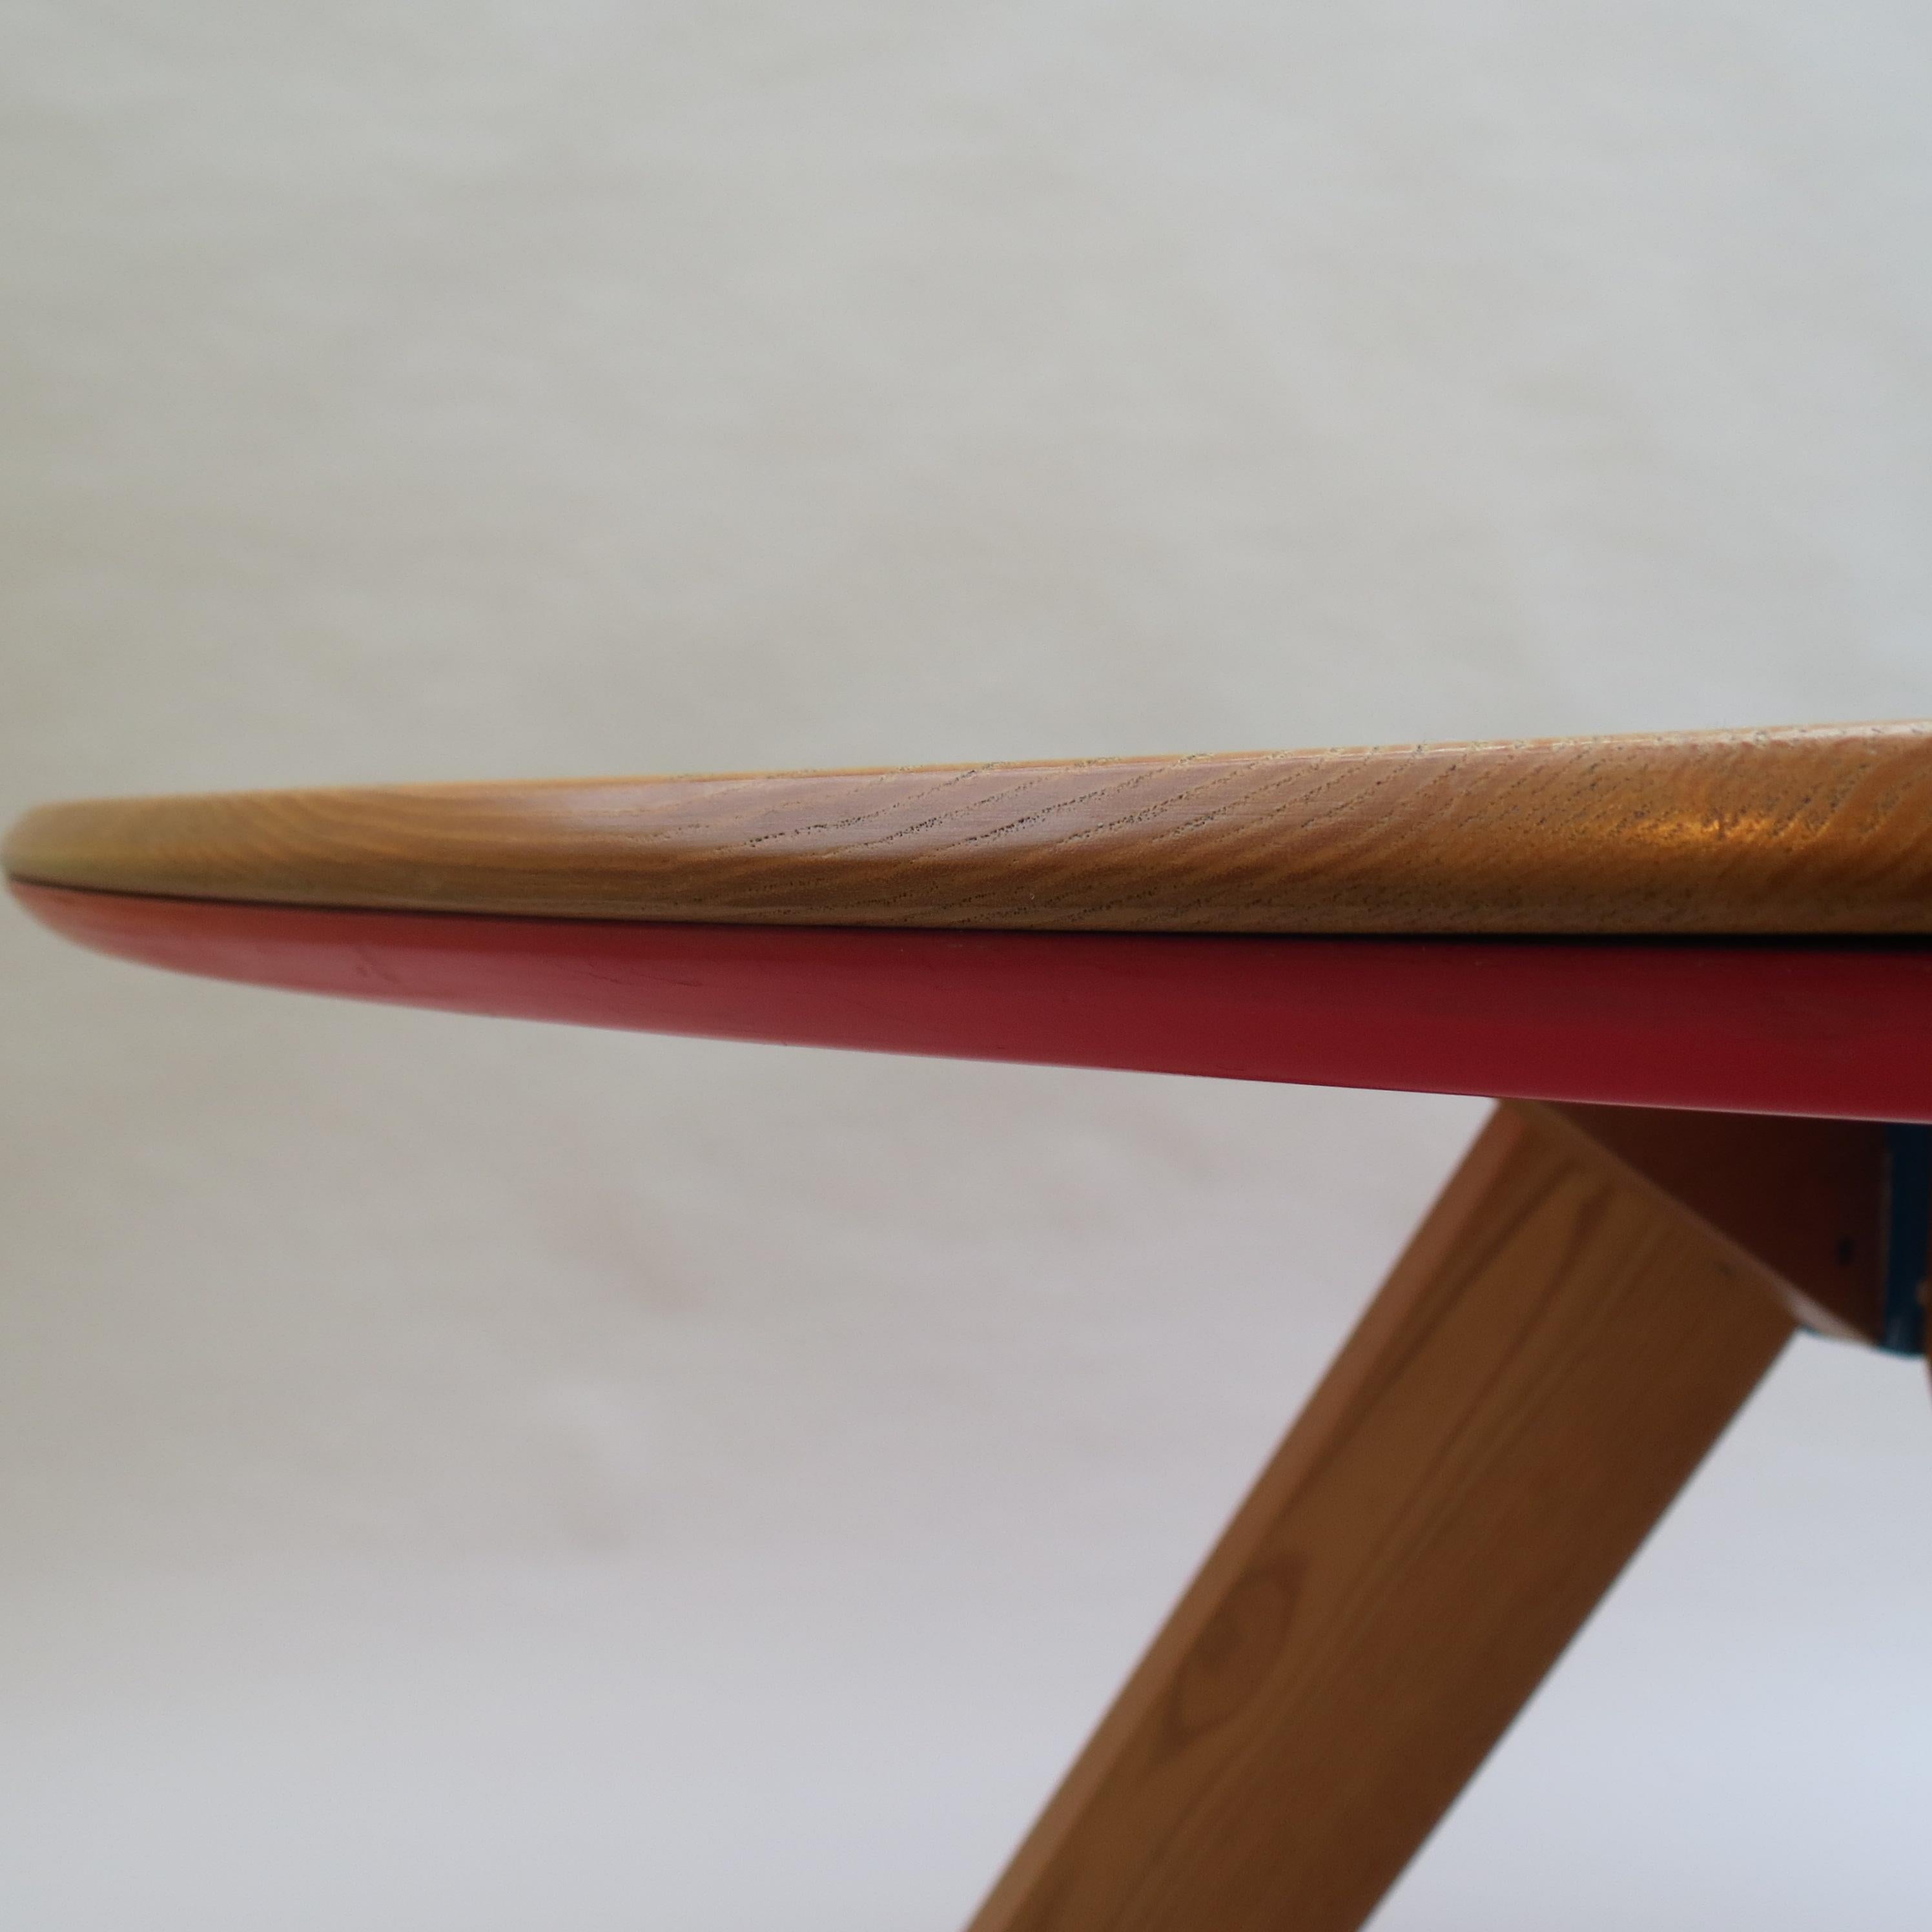 Midcentury Bespoke Round Dining Table by David Field 1980s with Red Blue Detail 1